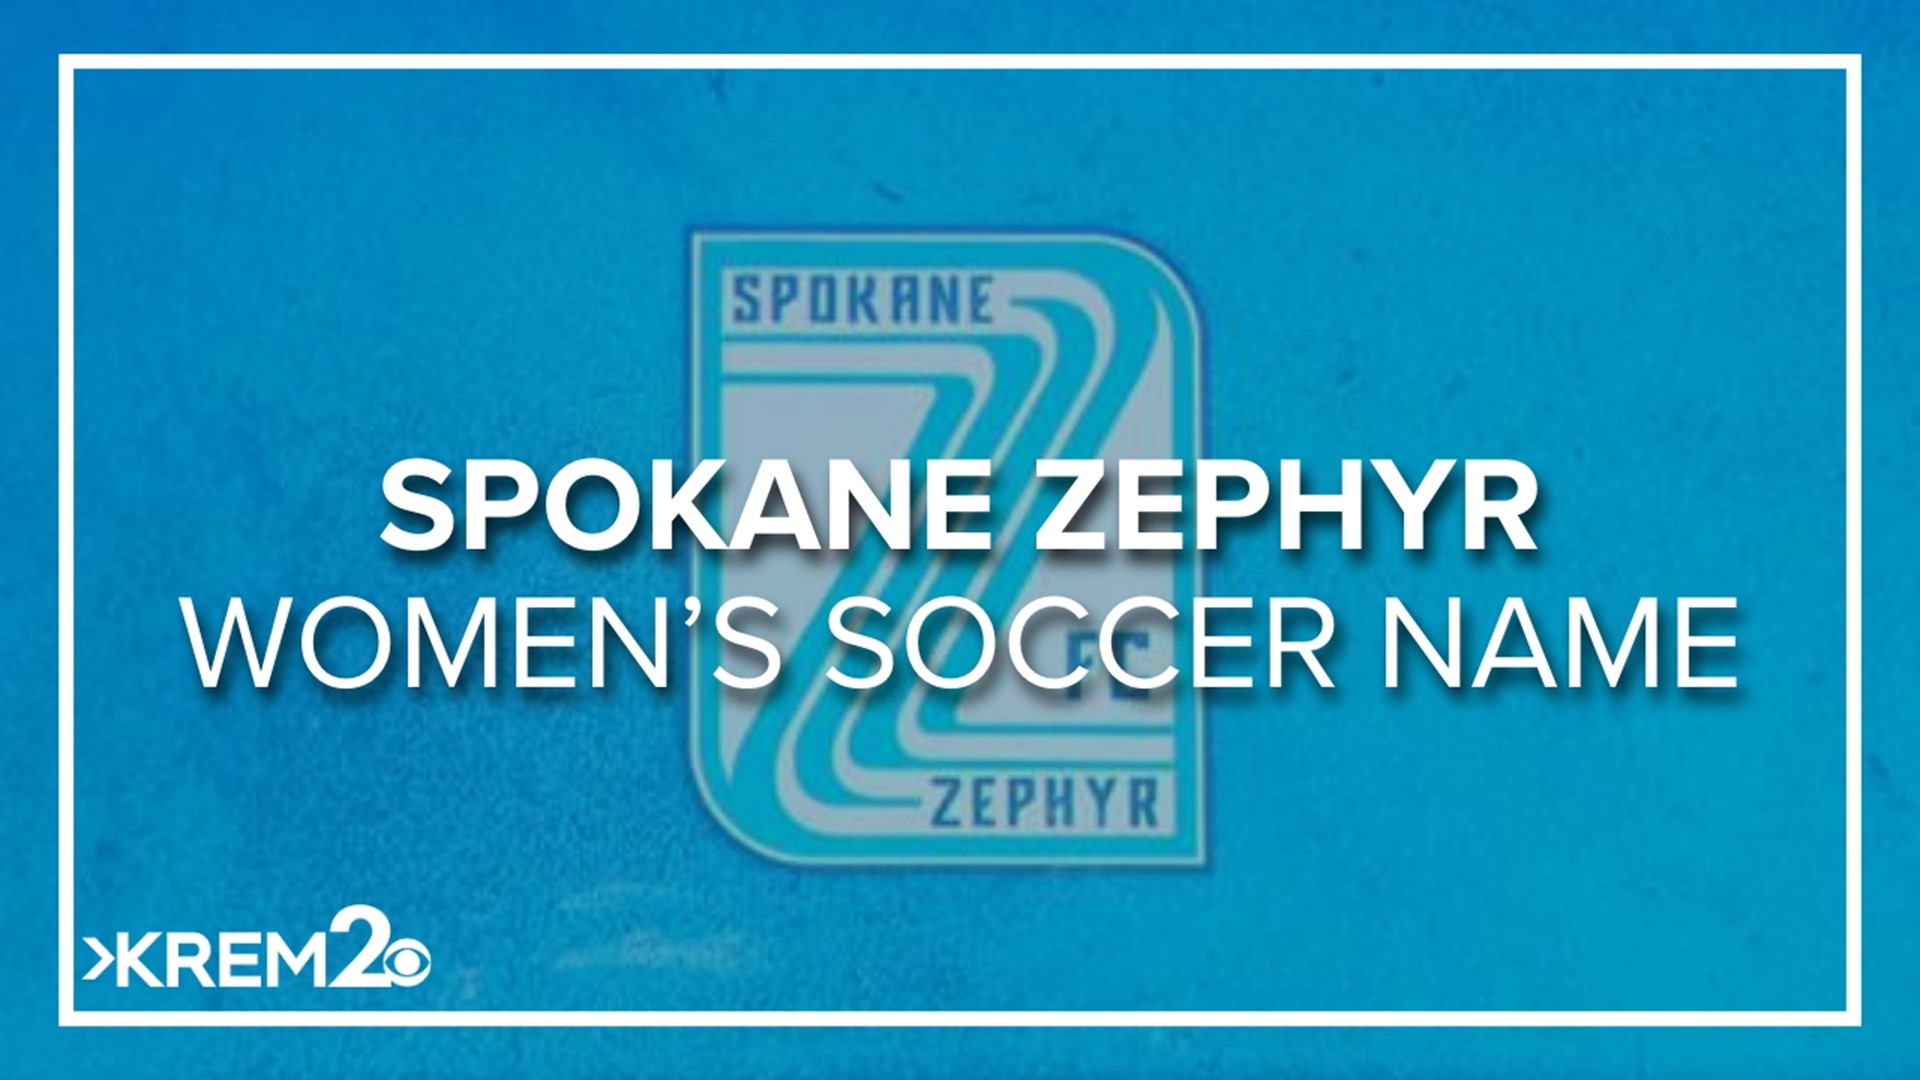 The newly named Spokane Zephyr revealed their team name at the Grand Davenport in front of over 2,000 new fans